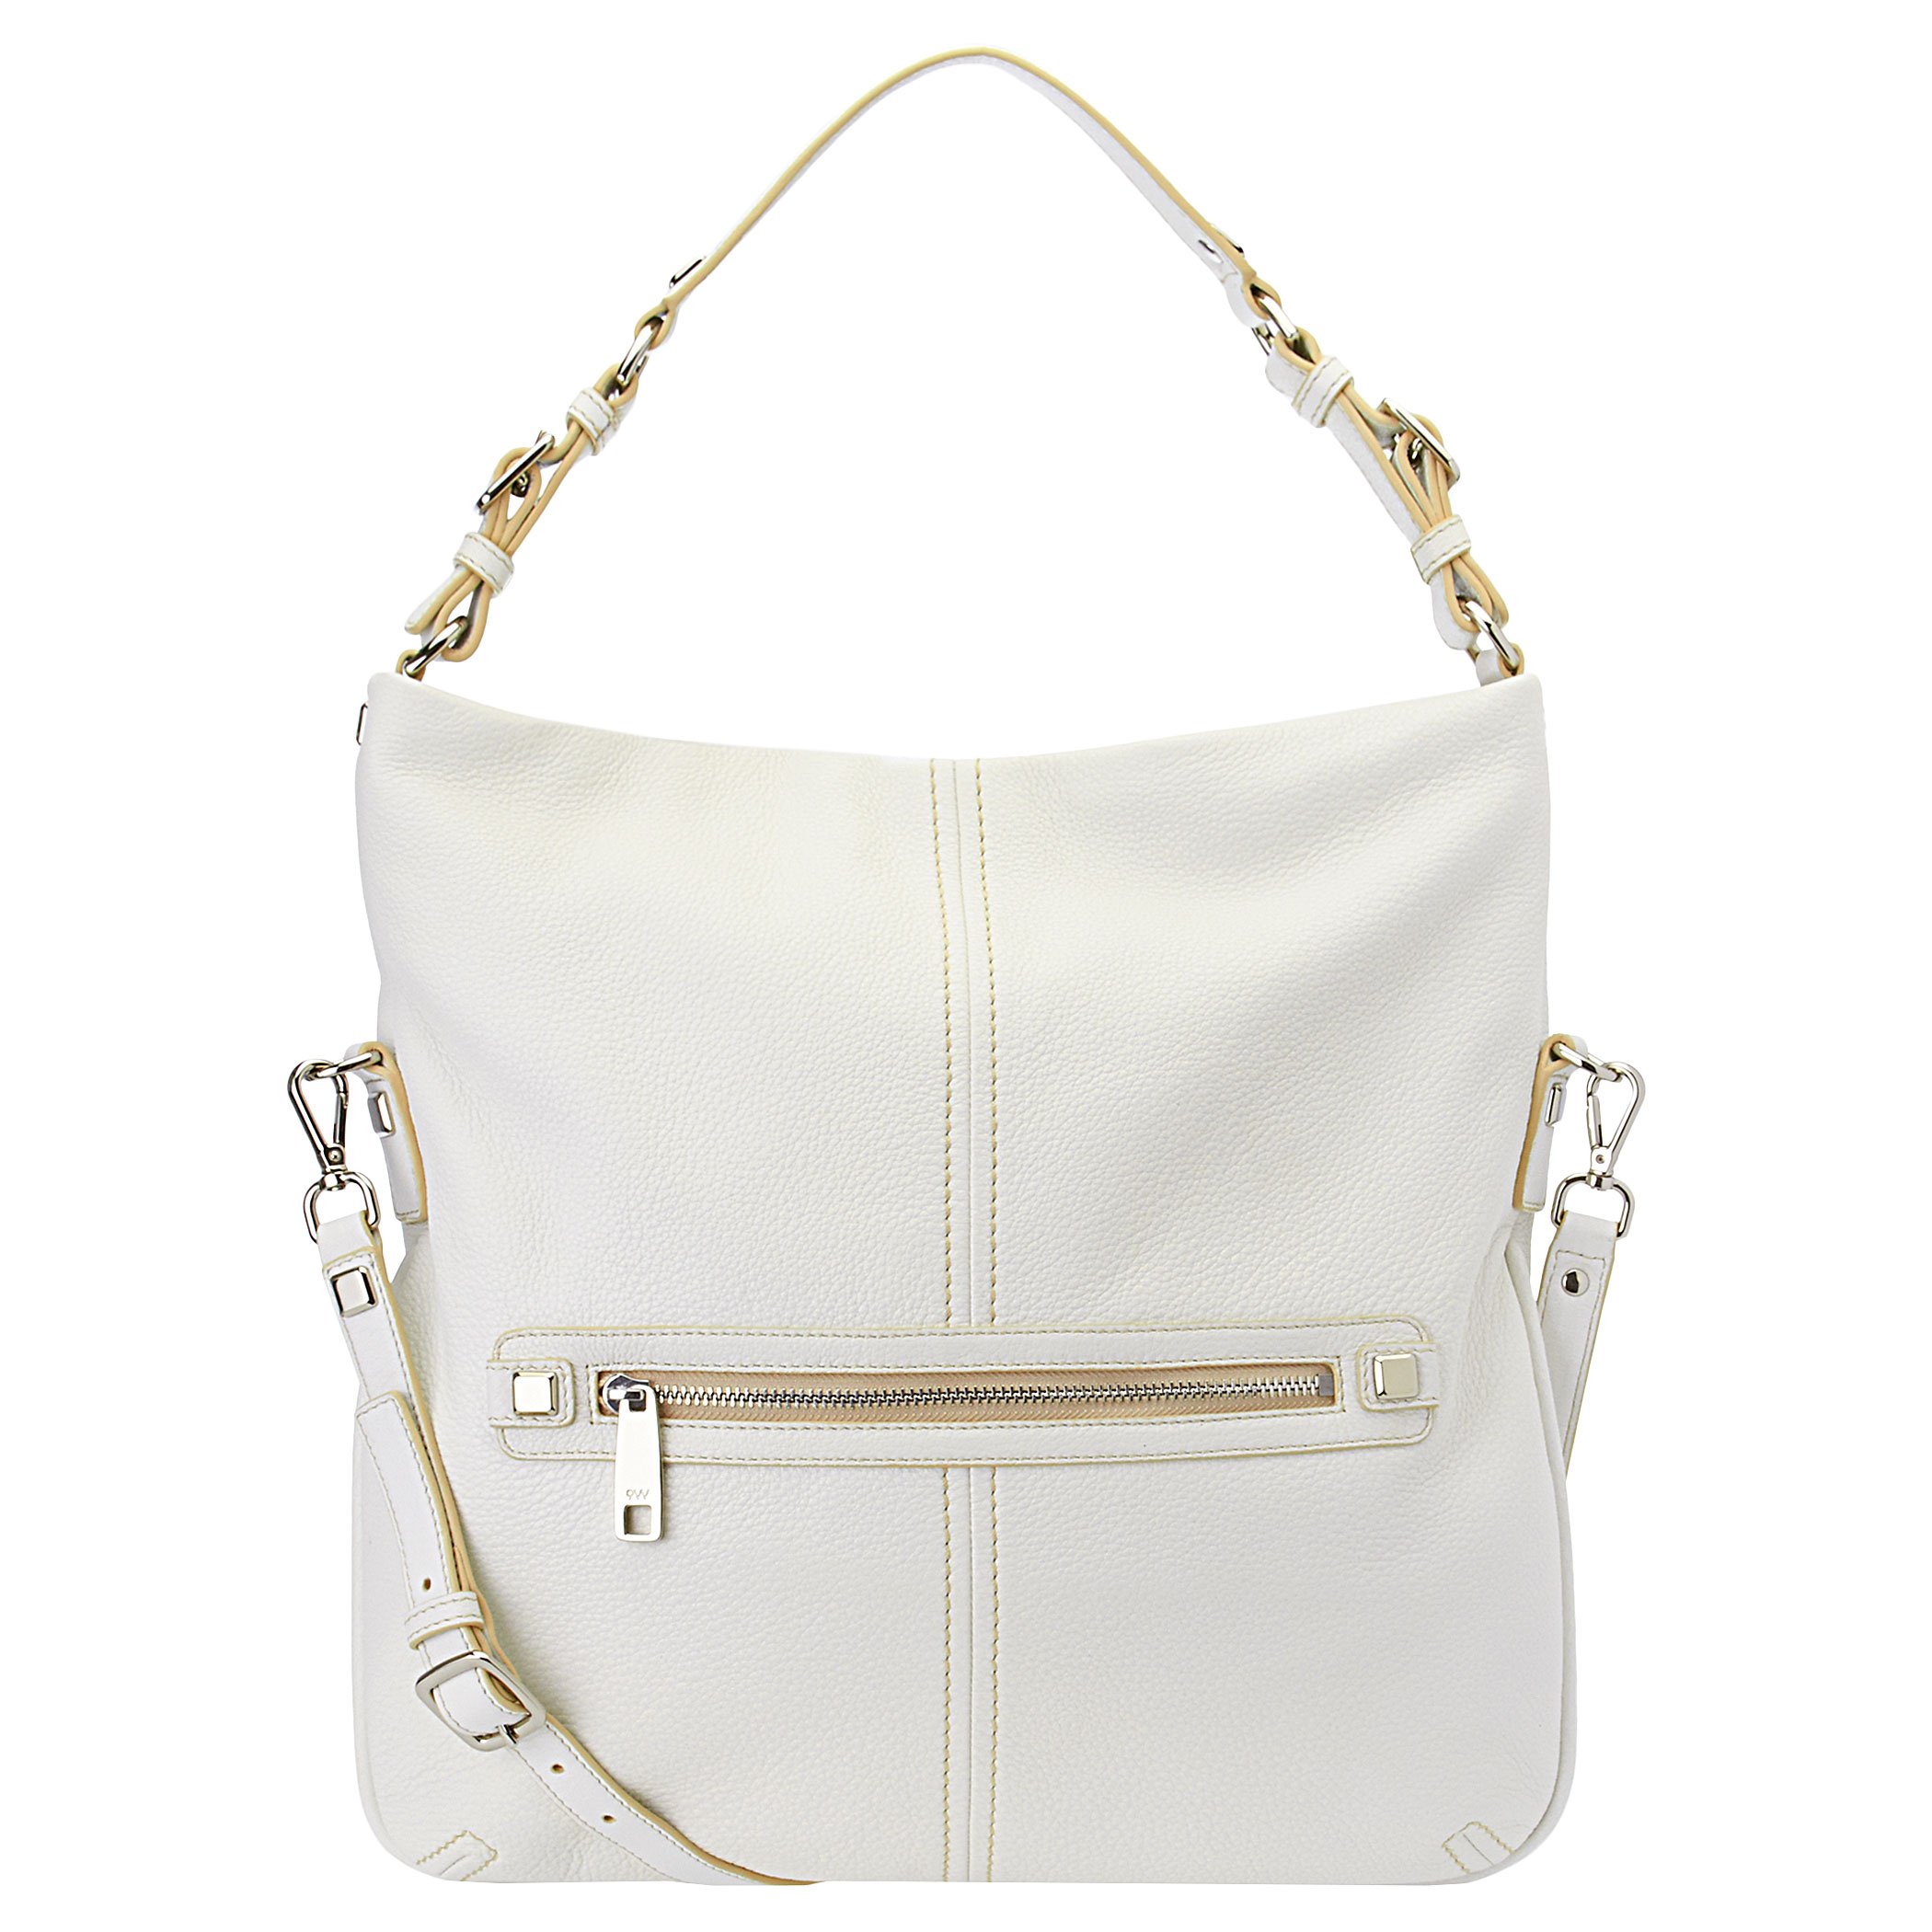 Nine West Nolita Pebbled Leather Hobo Bag in White (WHITE LEATHER) | Lyst